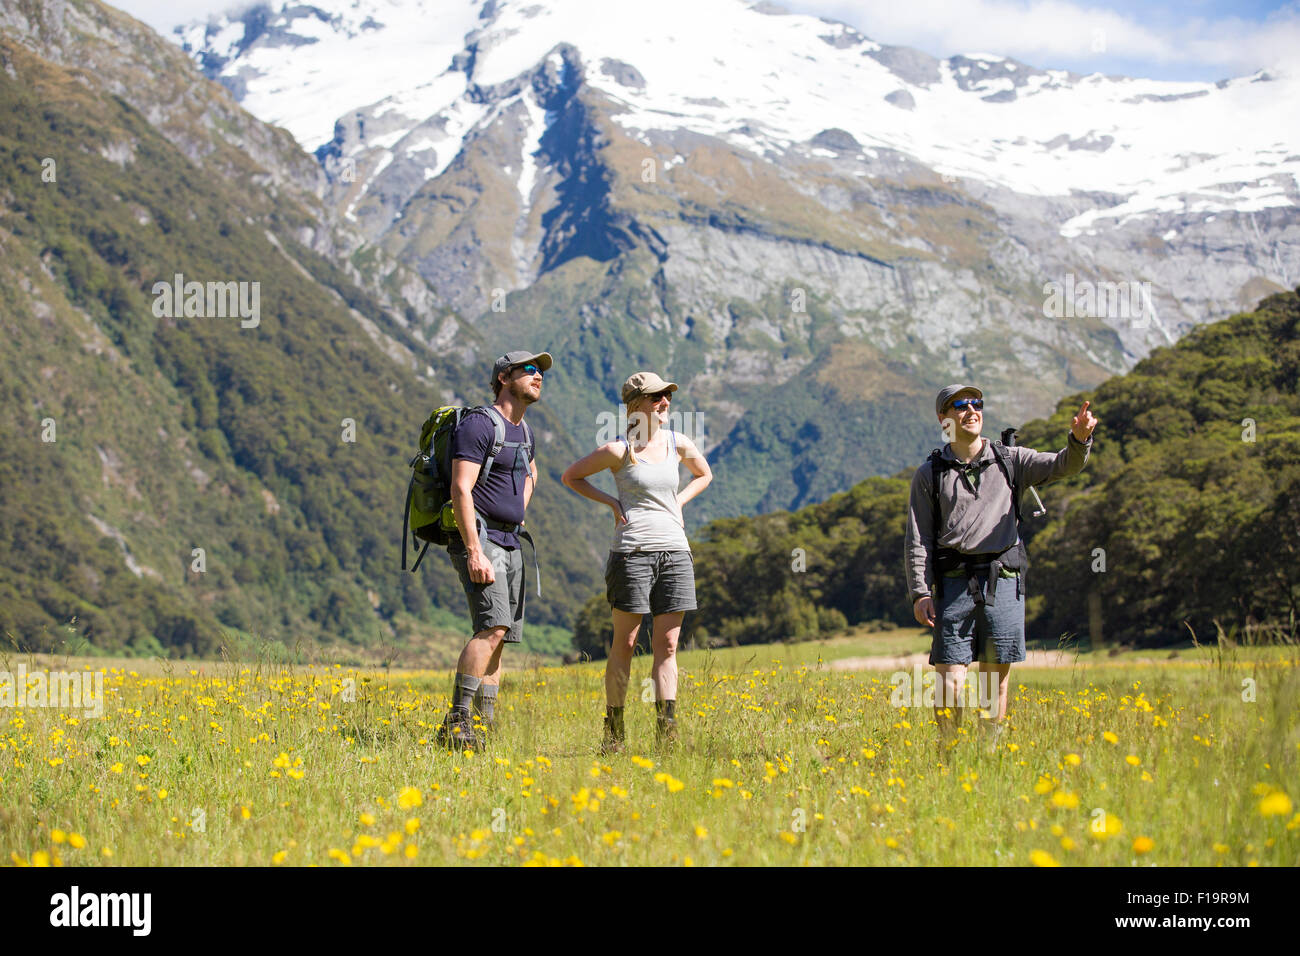 New Zealand, South Island, Mt Aspiring National Park, Siberia, group hiking in mountains with yellow valley floor flowers. Stock Photo